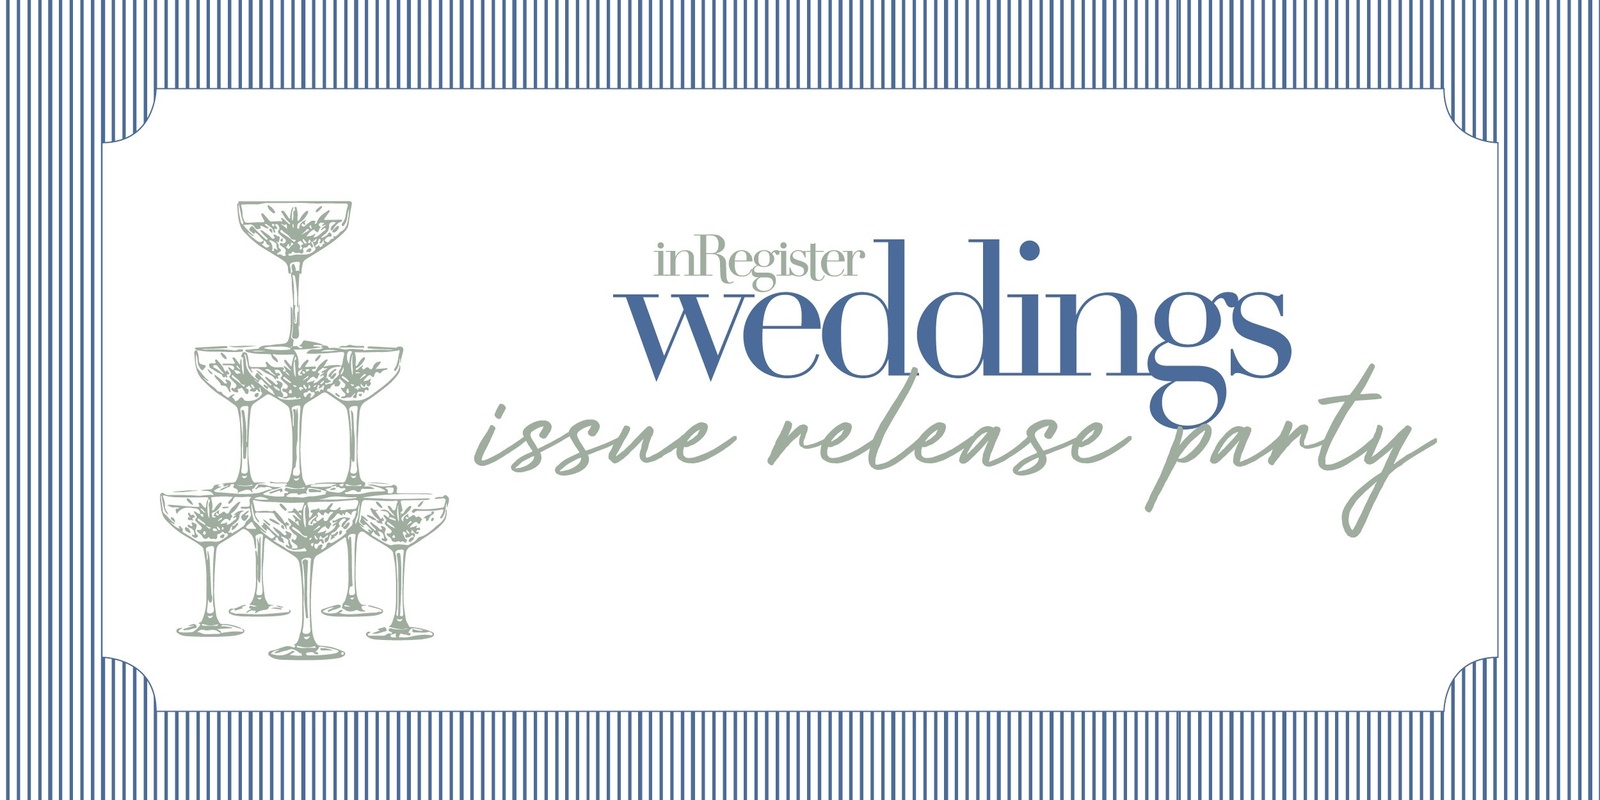 Banner image for inRegister Weddings Issue Release Party